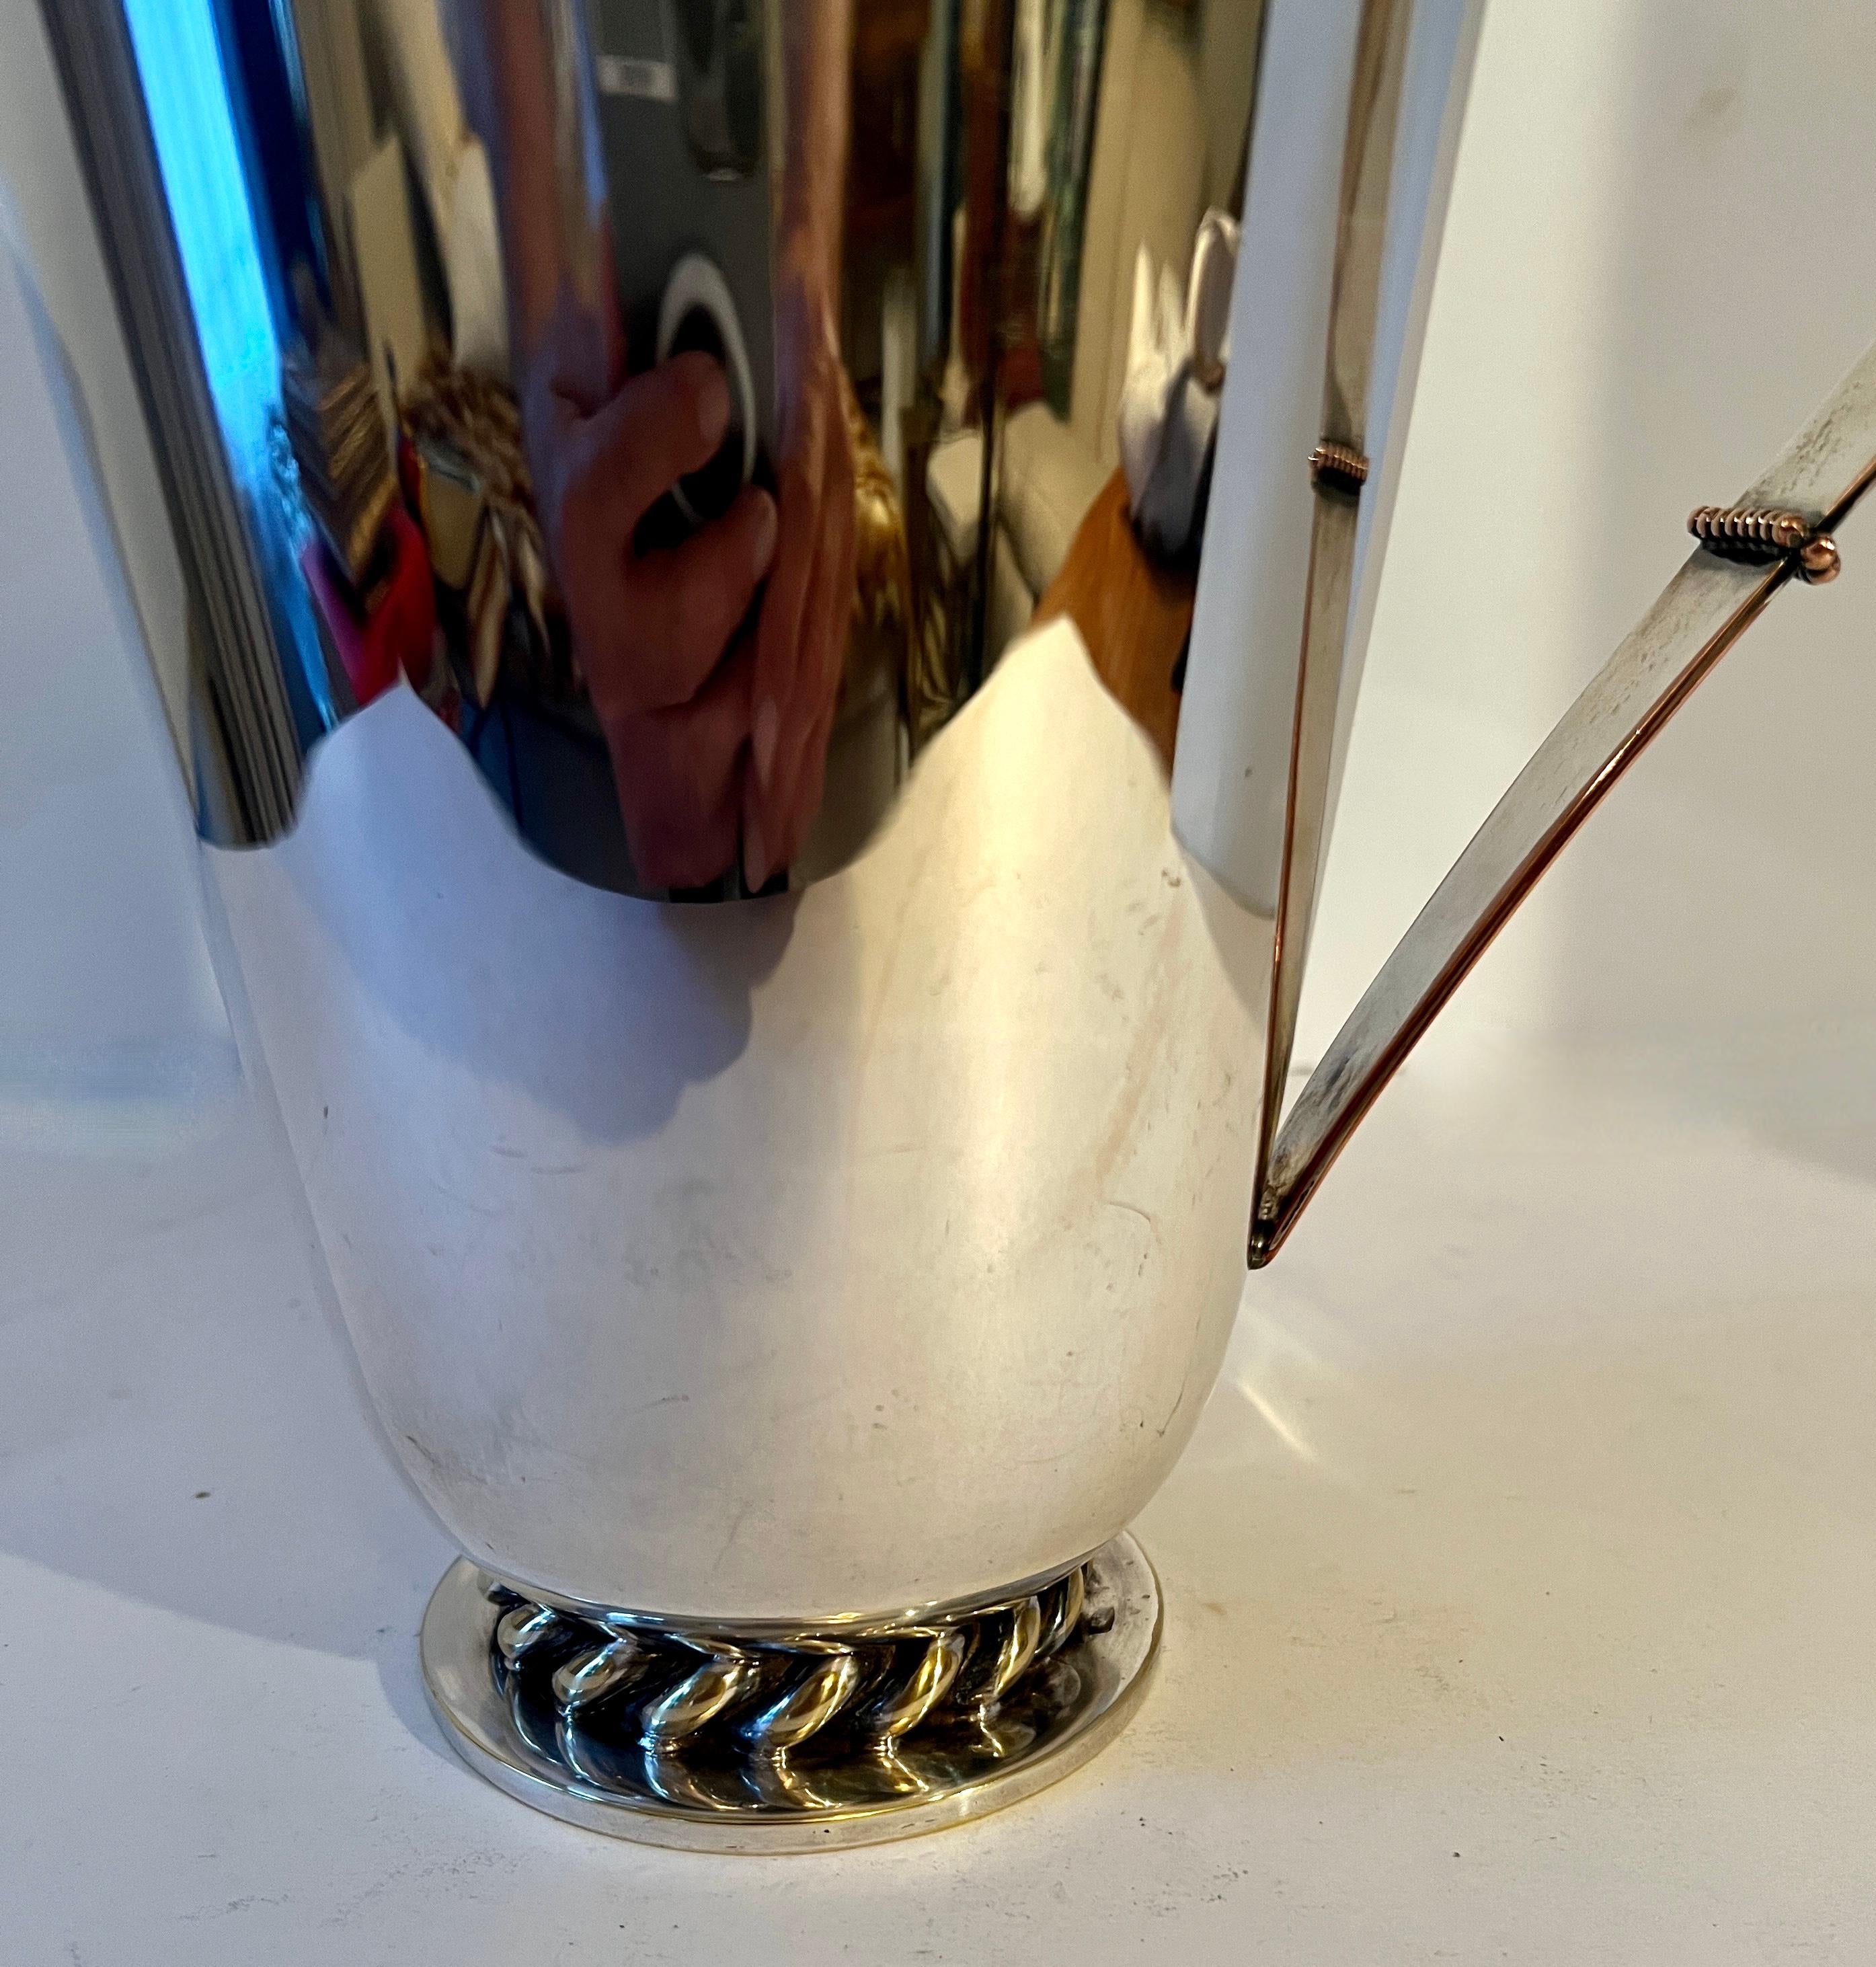 A very sexy and sophisticated Silver Plate Pitcher.  The shape and styling are impeccable.  A nice sized pitcher for mixers, cocktails, juices, etc.

The star of any well stocked bar, the shape is great and the handle has a Georg Jensen inspired